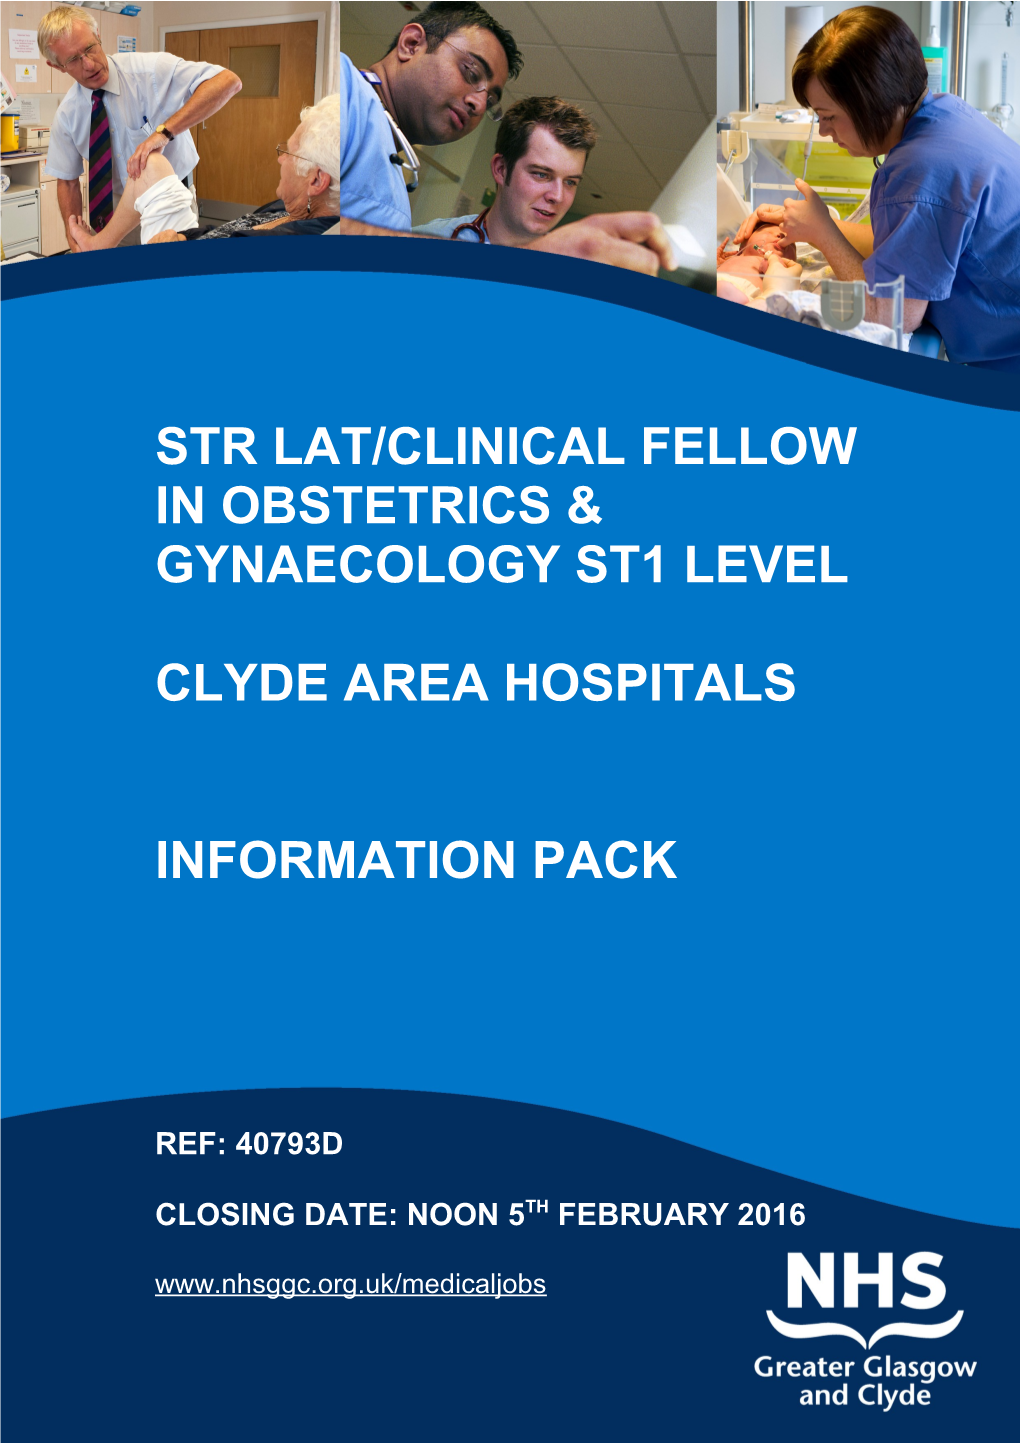 STR LAT/CLINICAL FELLOW in OBSTETRICS & Gynaecology ST1 LEVEL